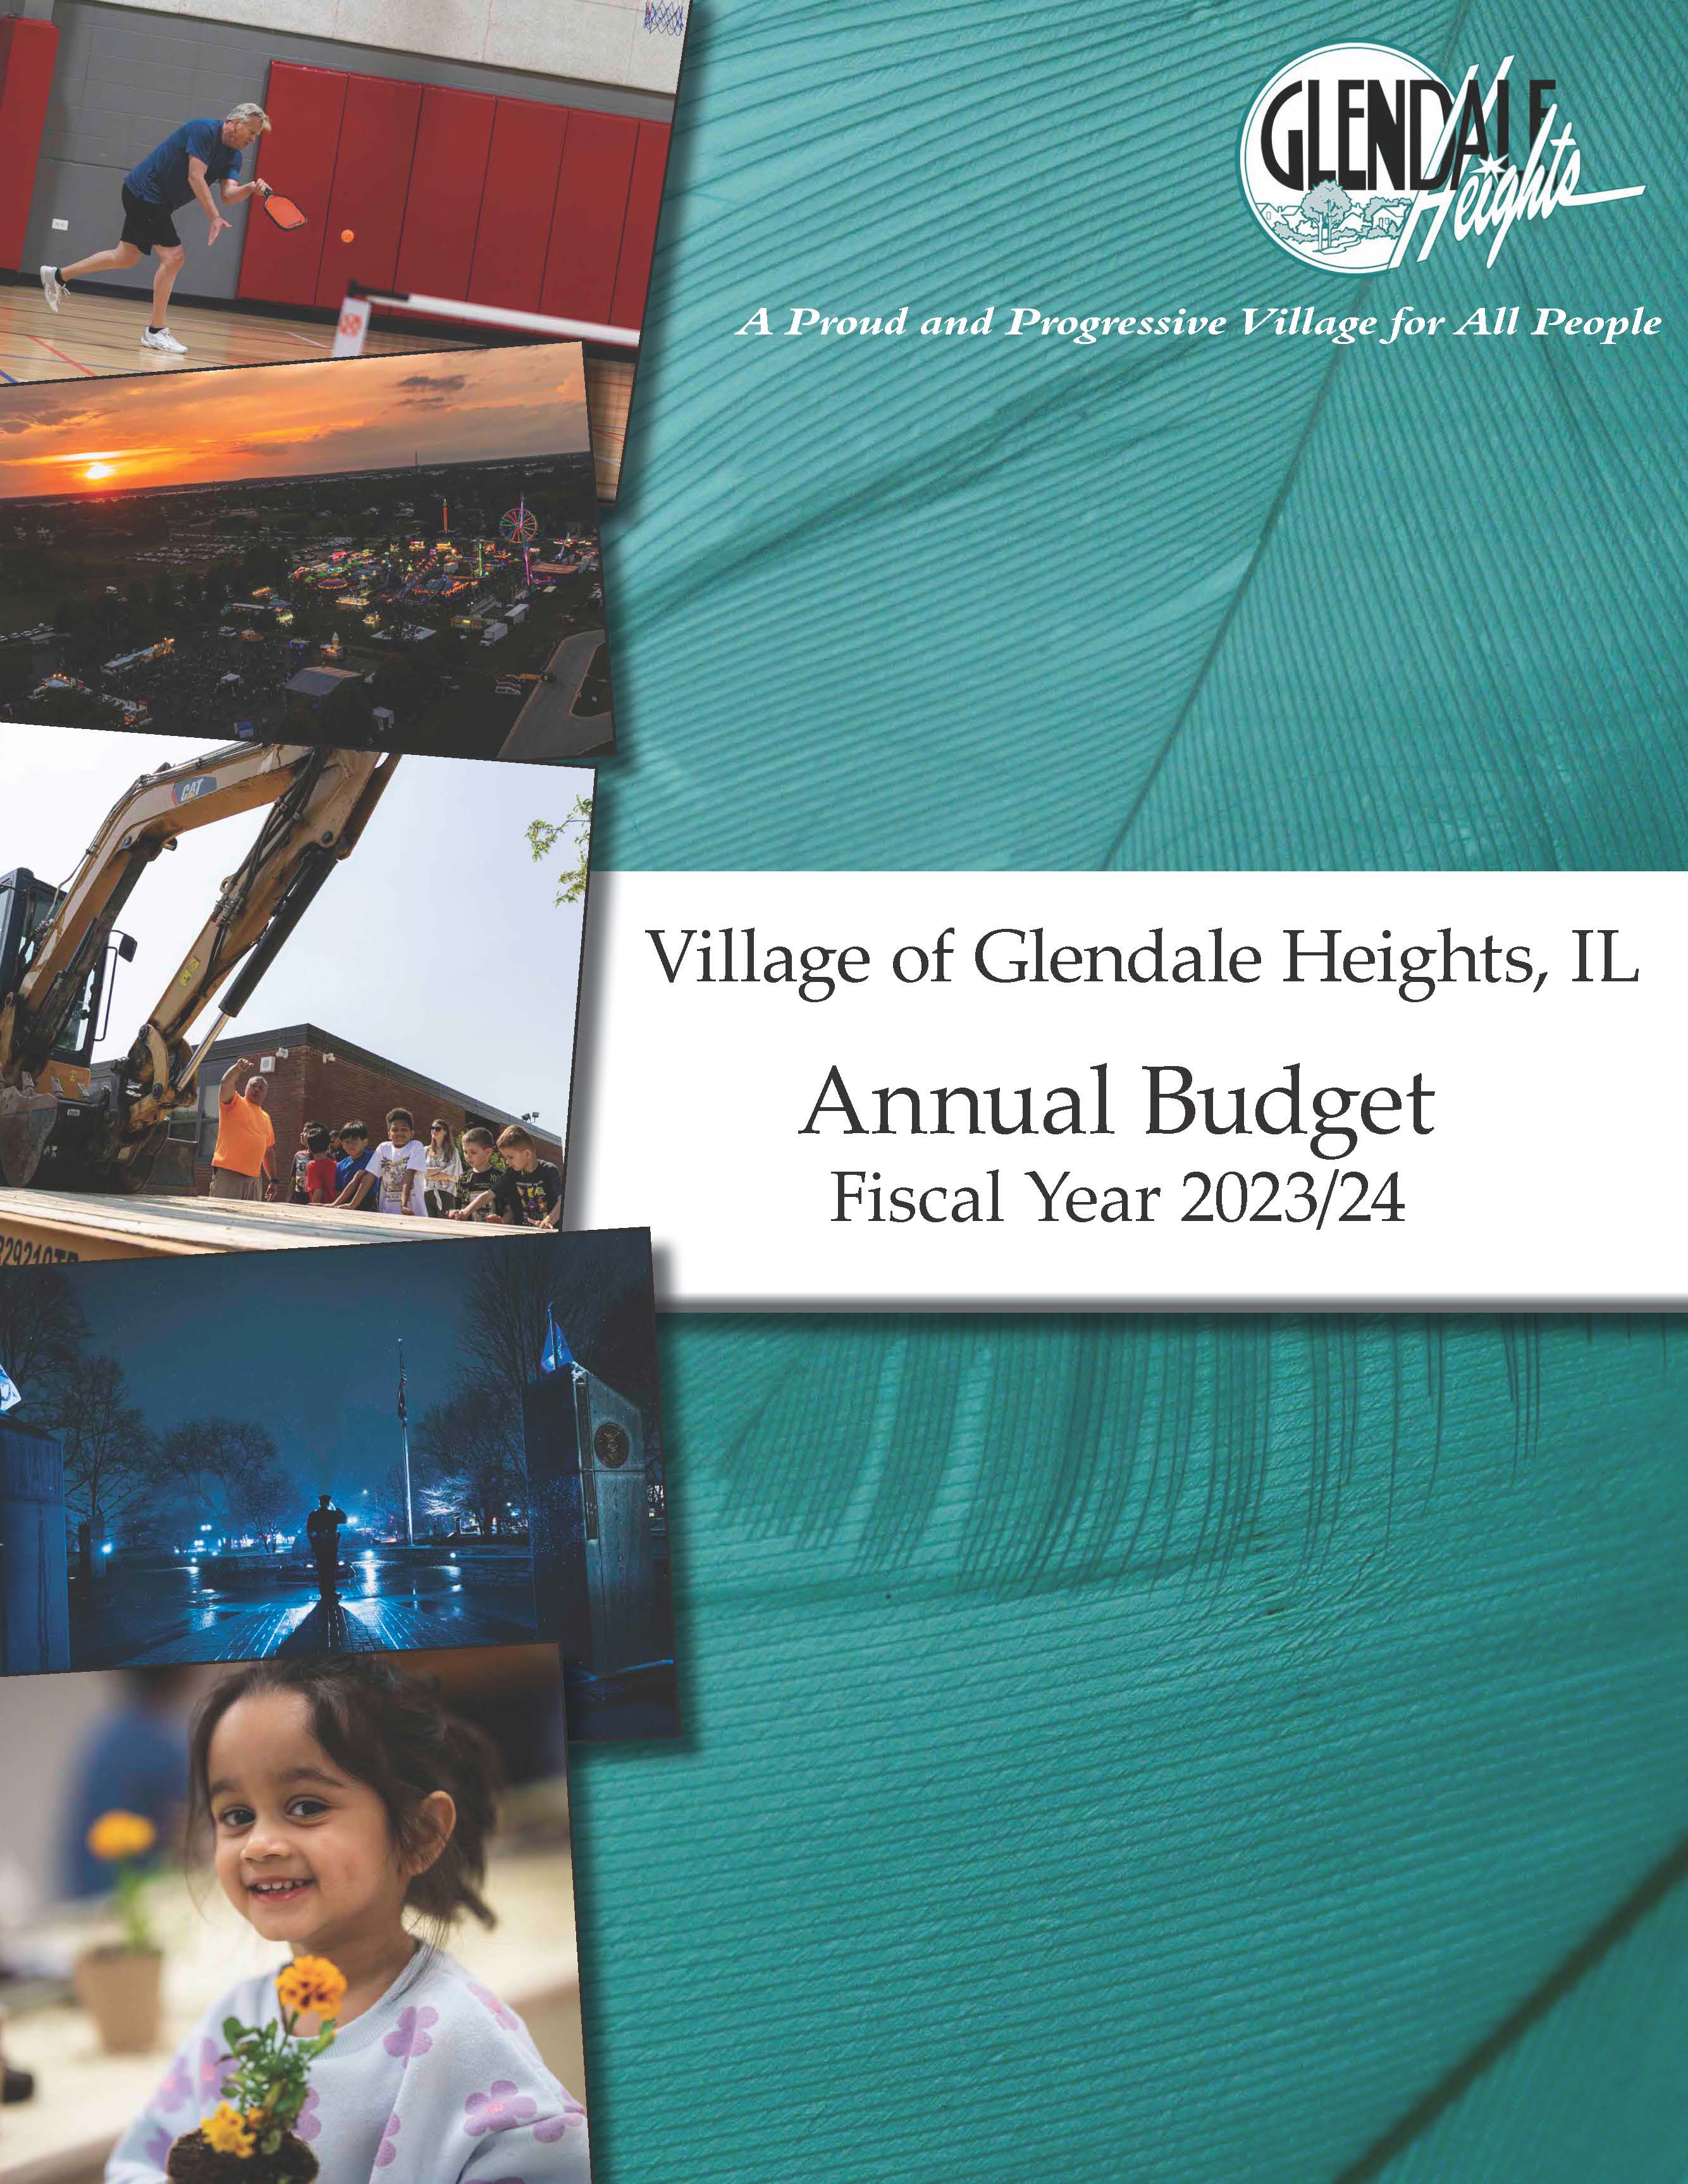 Fiscal Year 2023-2024 Annual Budget